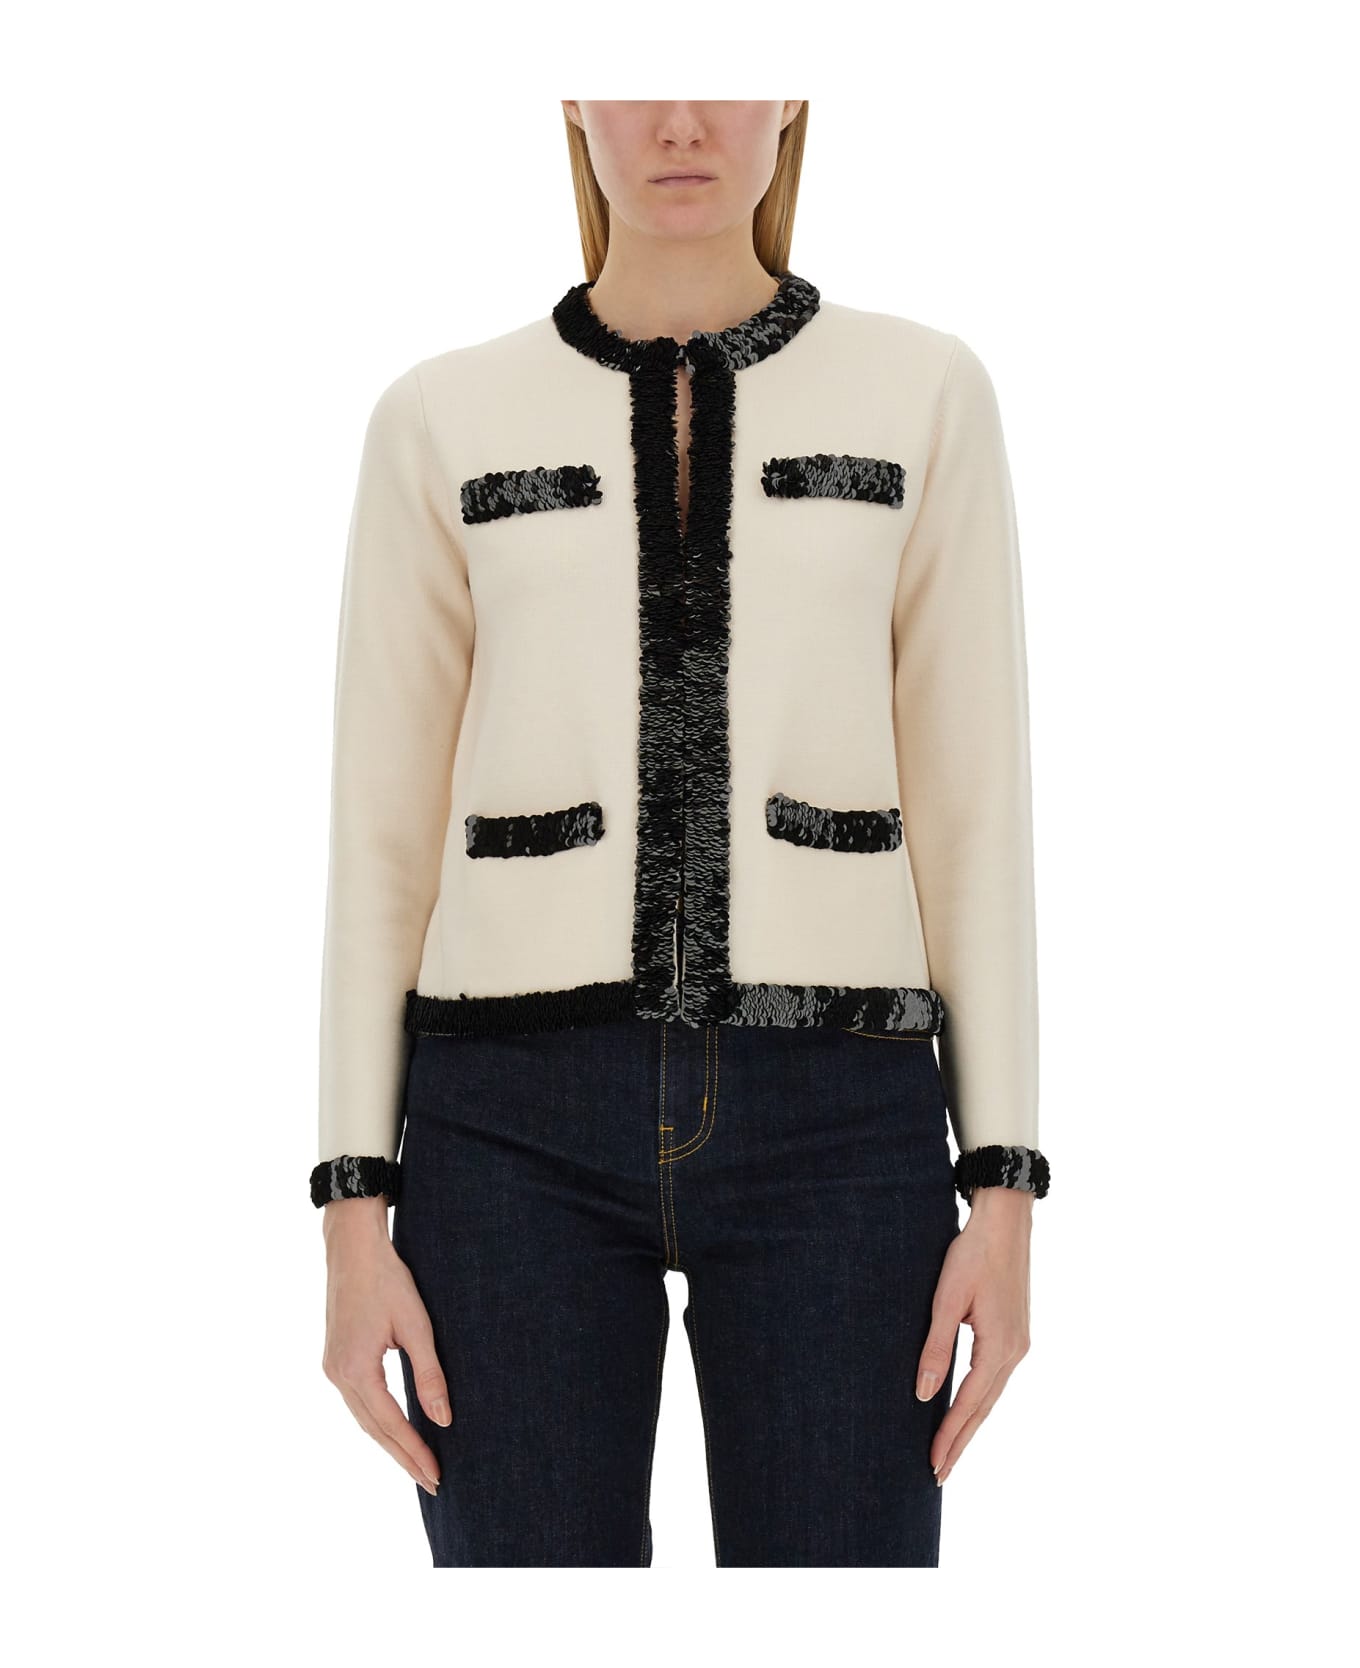 Tory Burch Sequin-embellished Cardigan - White/Black